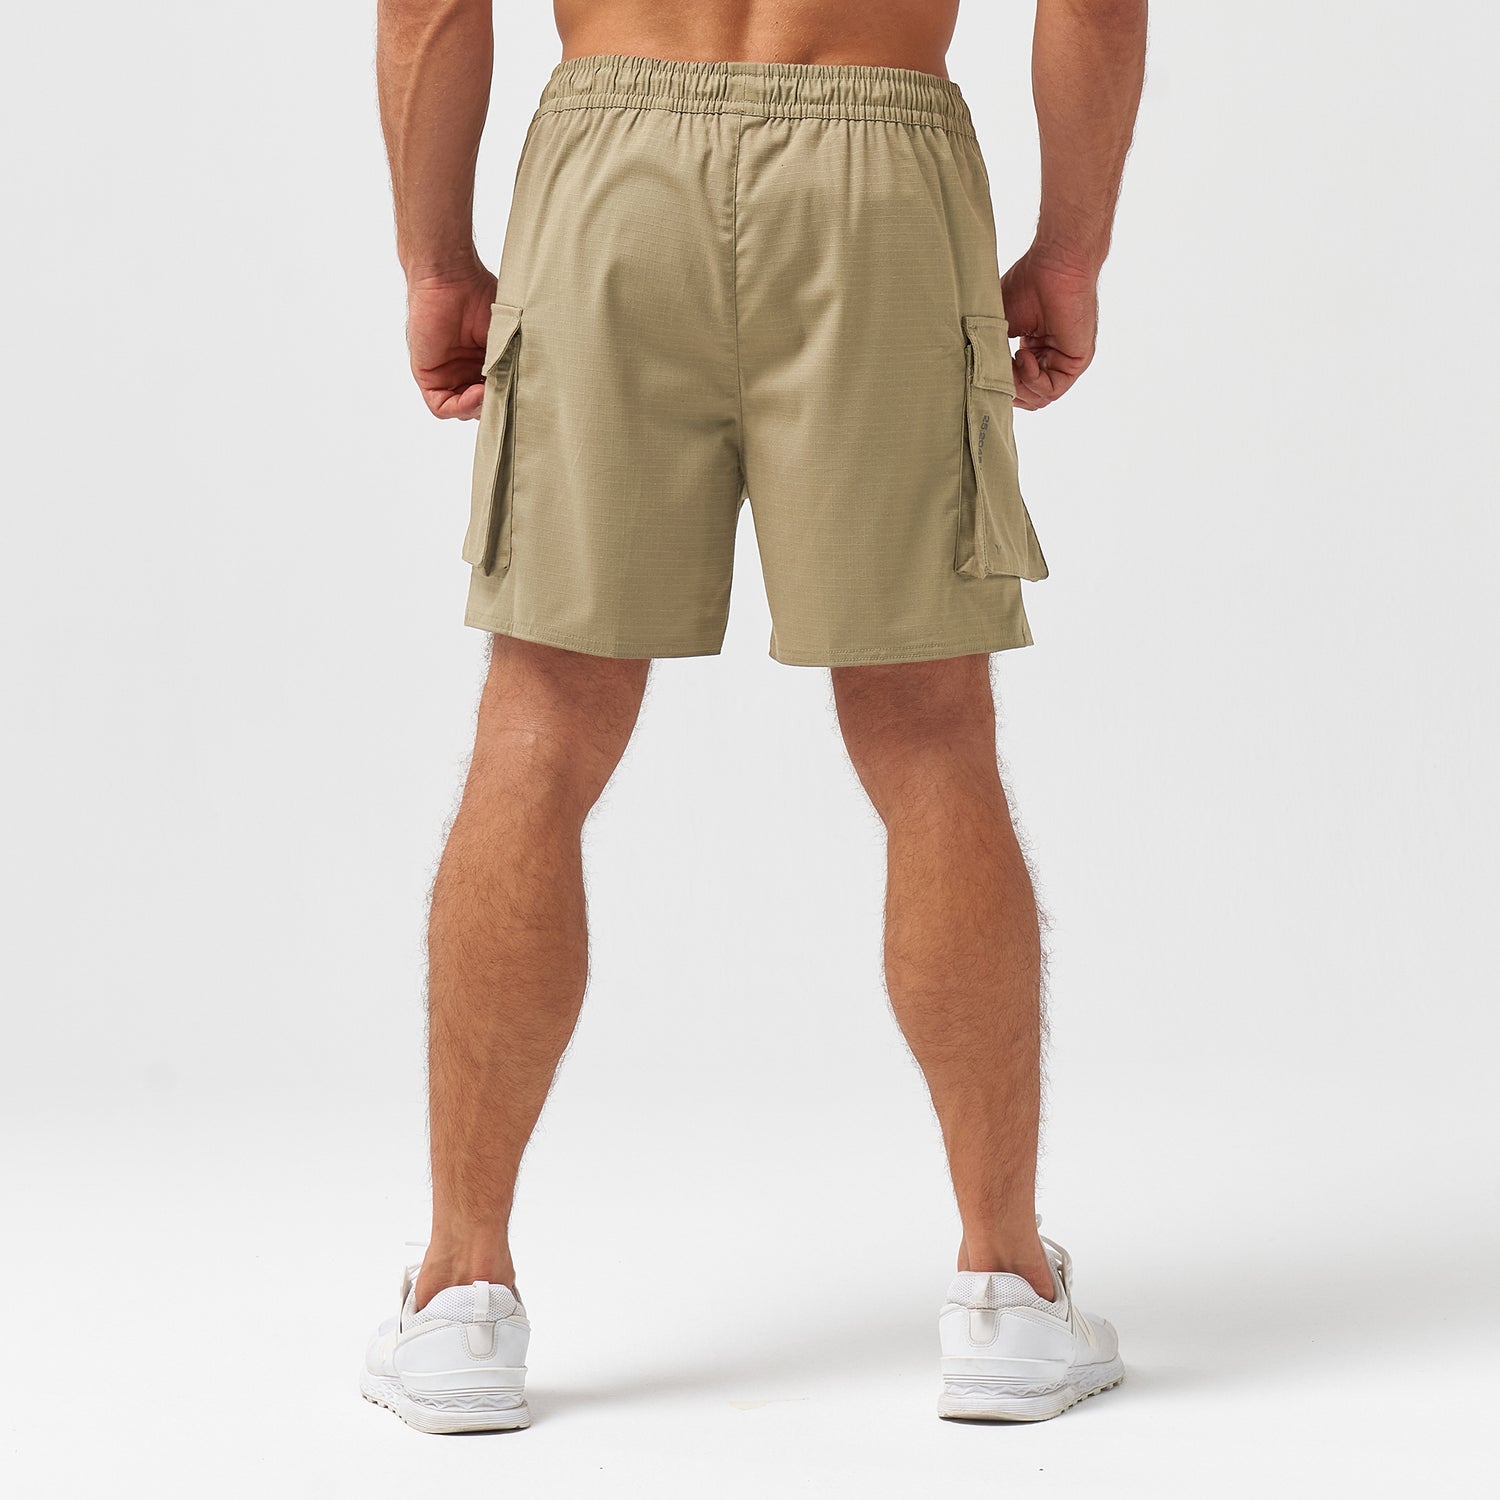 squatwolf-gym-wear-code-2-in-1-cargo-shorts-green-workout-shorts-for-men